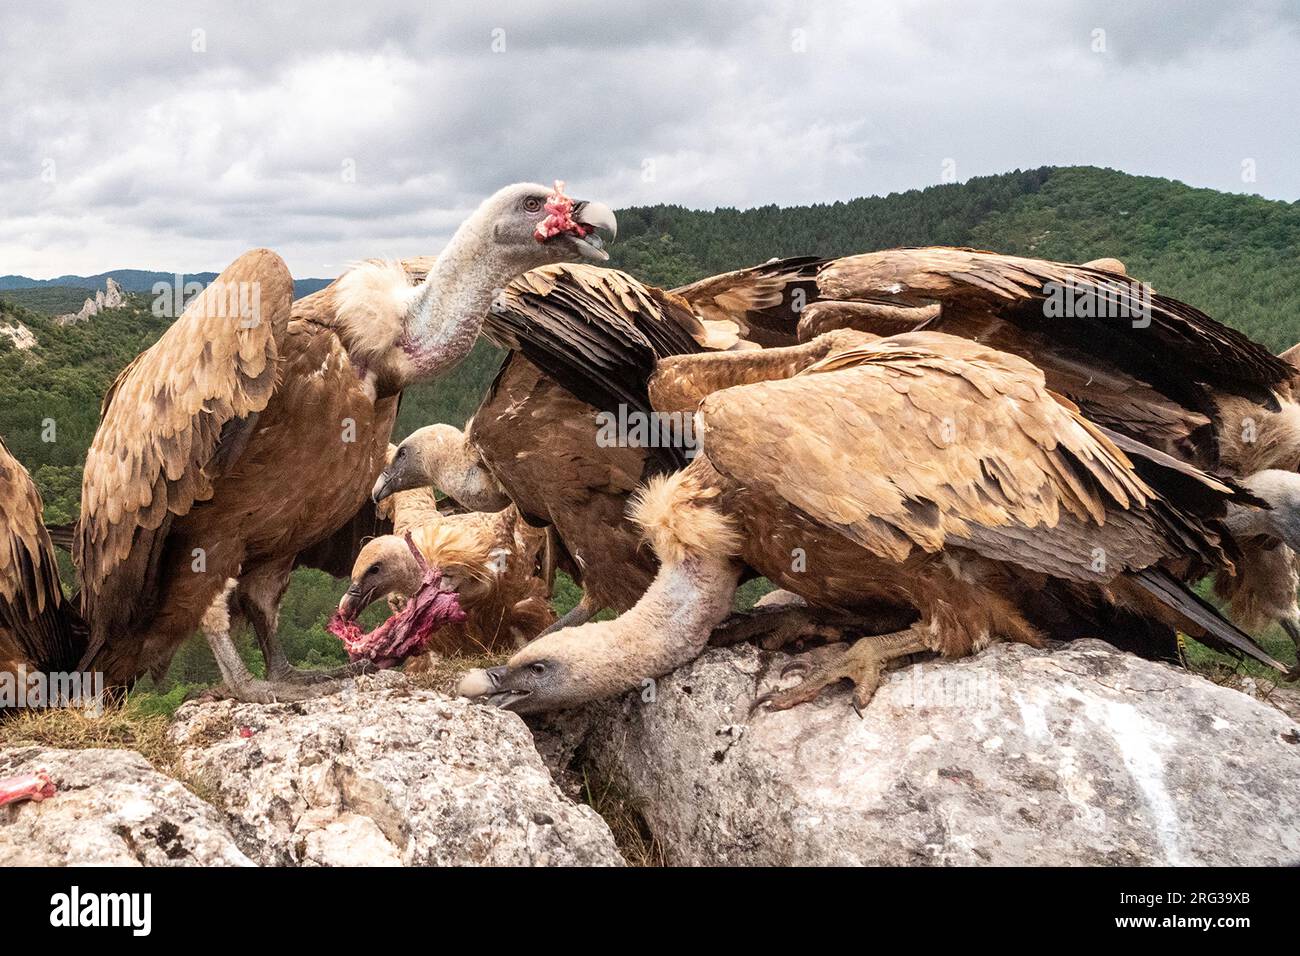 Griffon Vulture, Gyps fulvus. Close-up of some Griffon Vultures eating while other Griffon Vultures are flying in Stock Photo